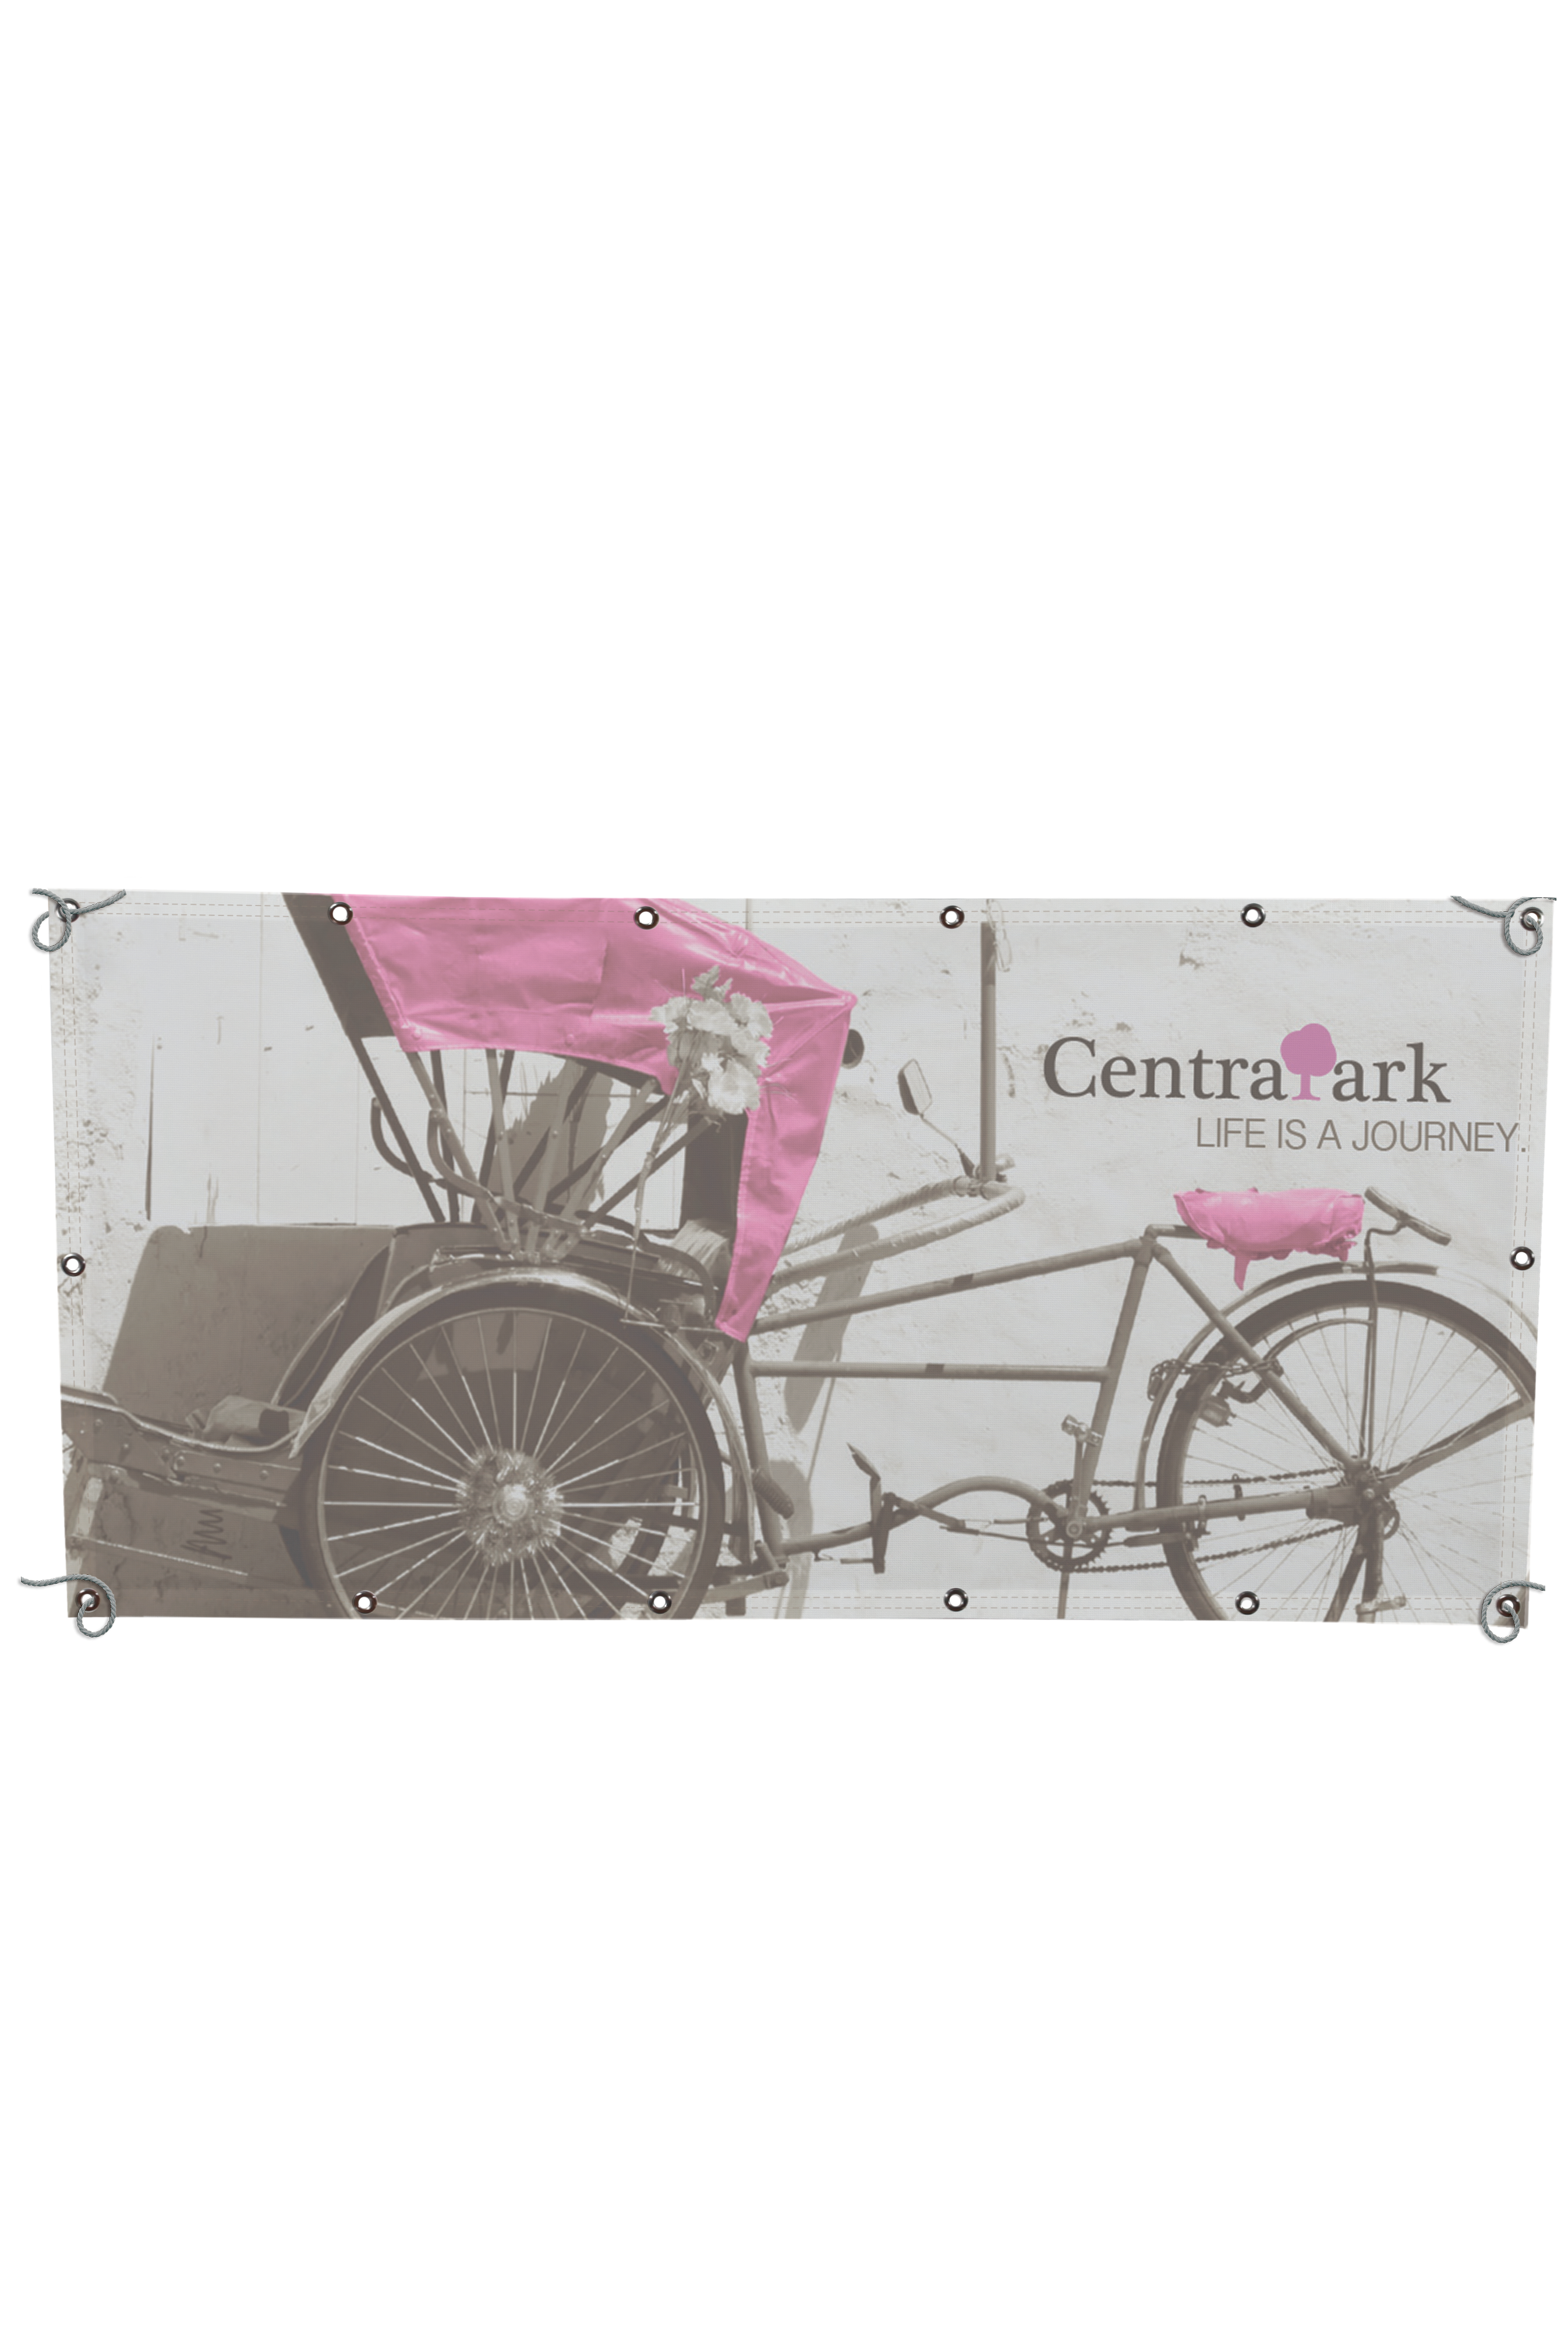 MESH BANNER WITH GRAY AND PINK CARRIAGE